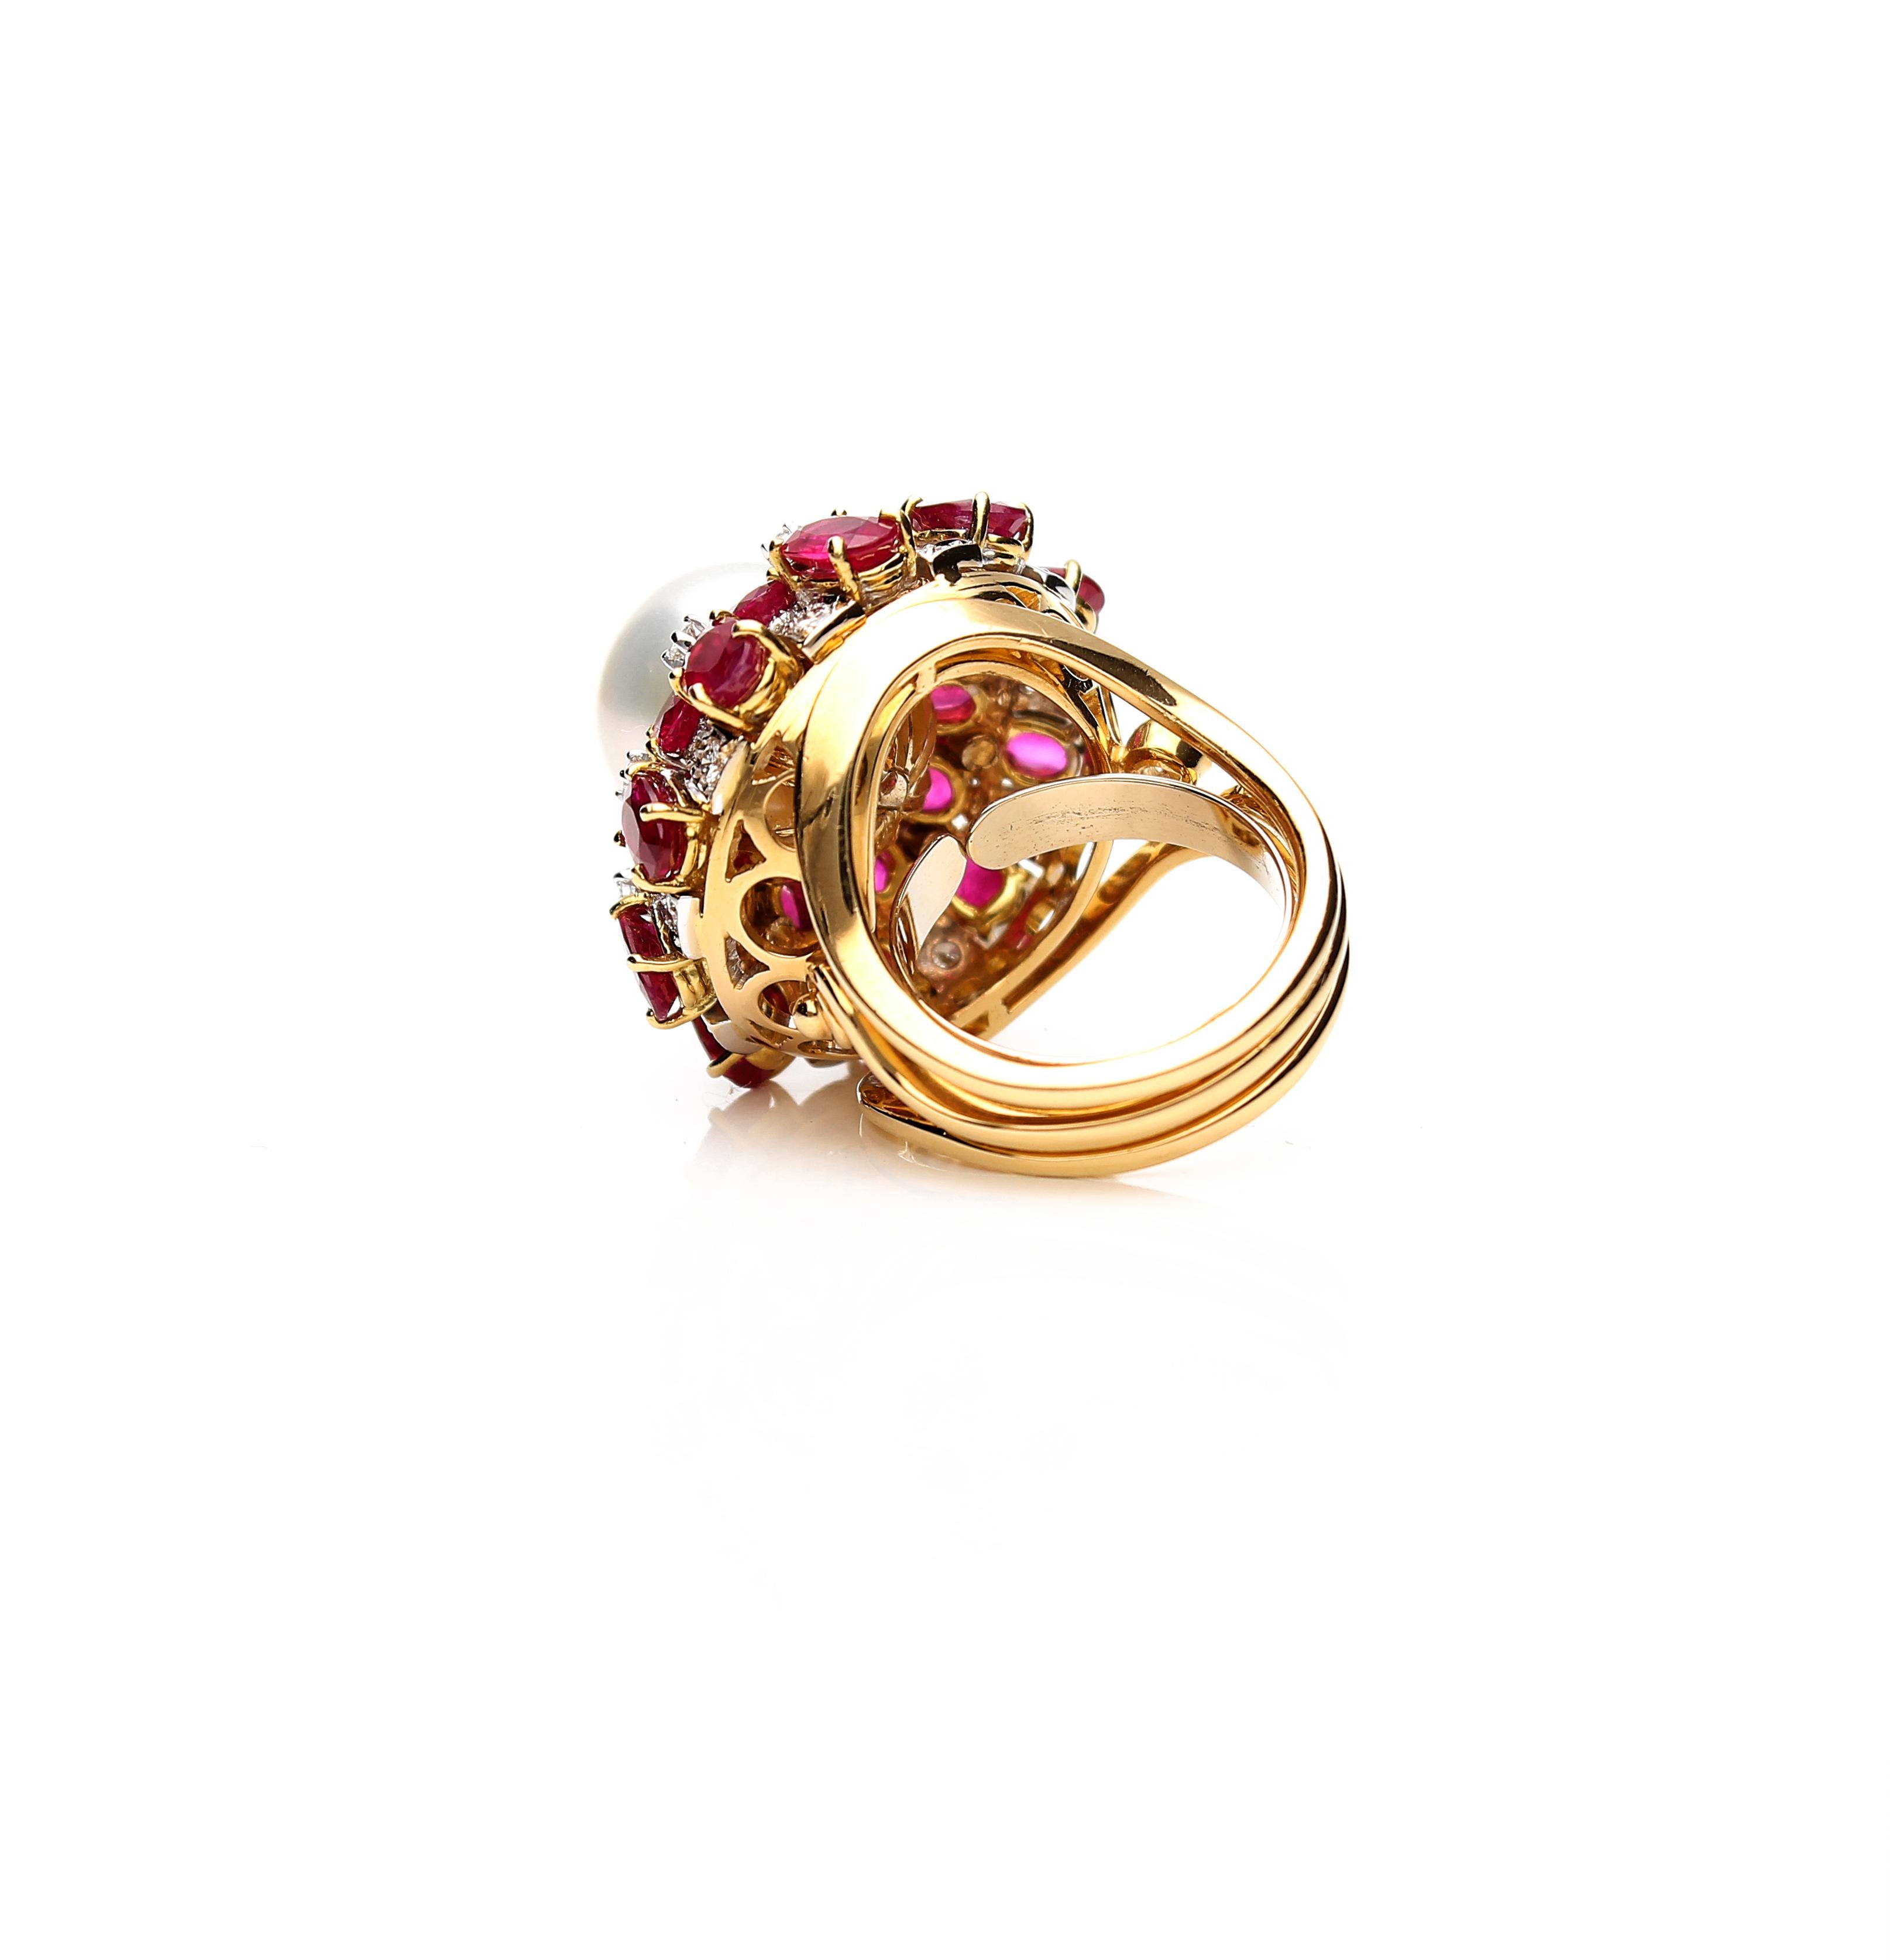 18 Karat Gold Ring with Oval Cut Rubies, Diamonds and South Sea Pearl 4